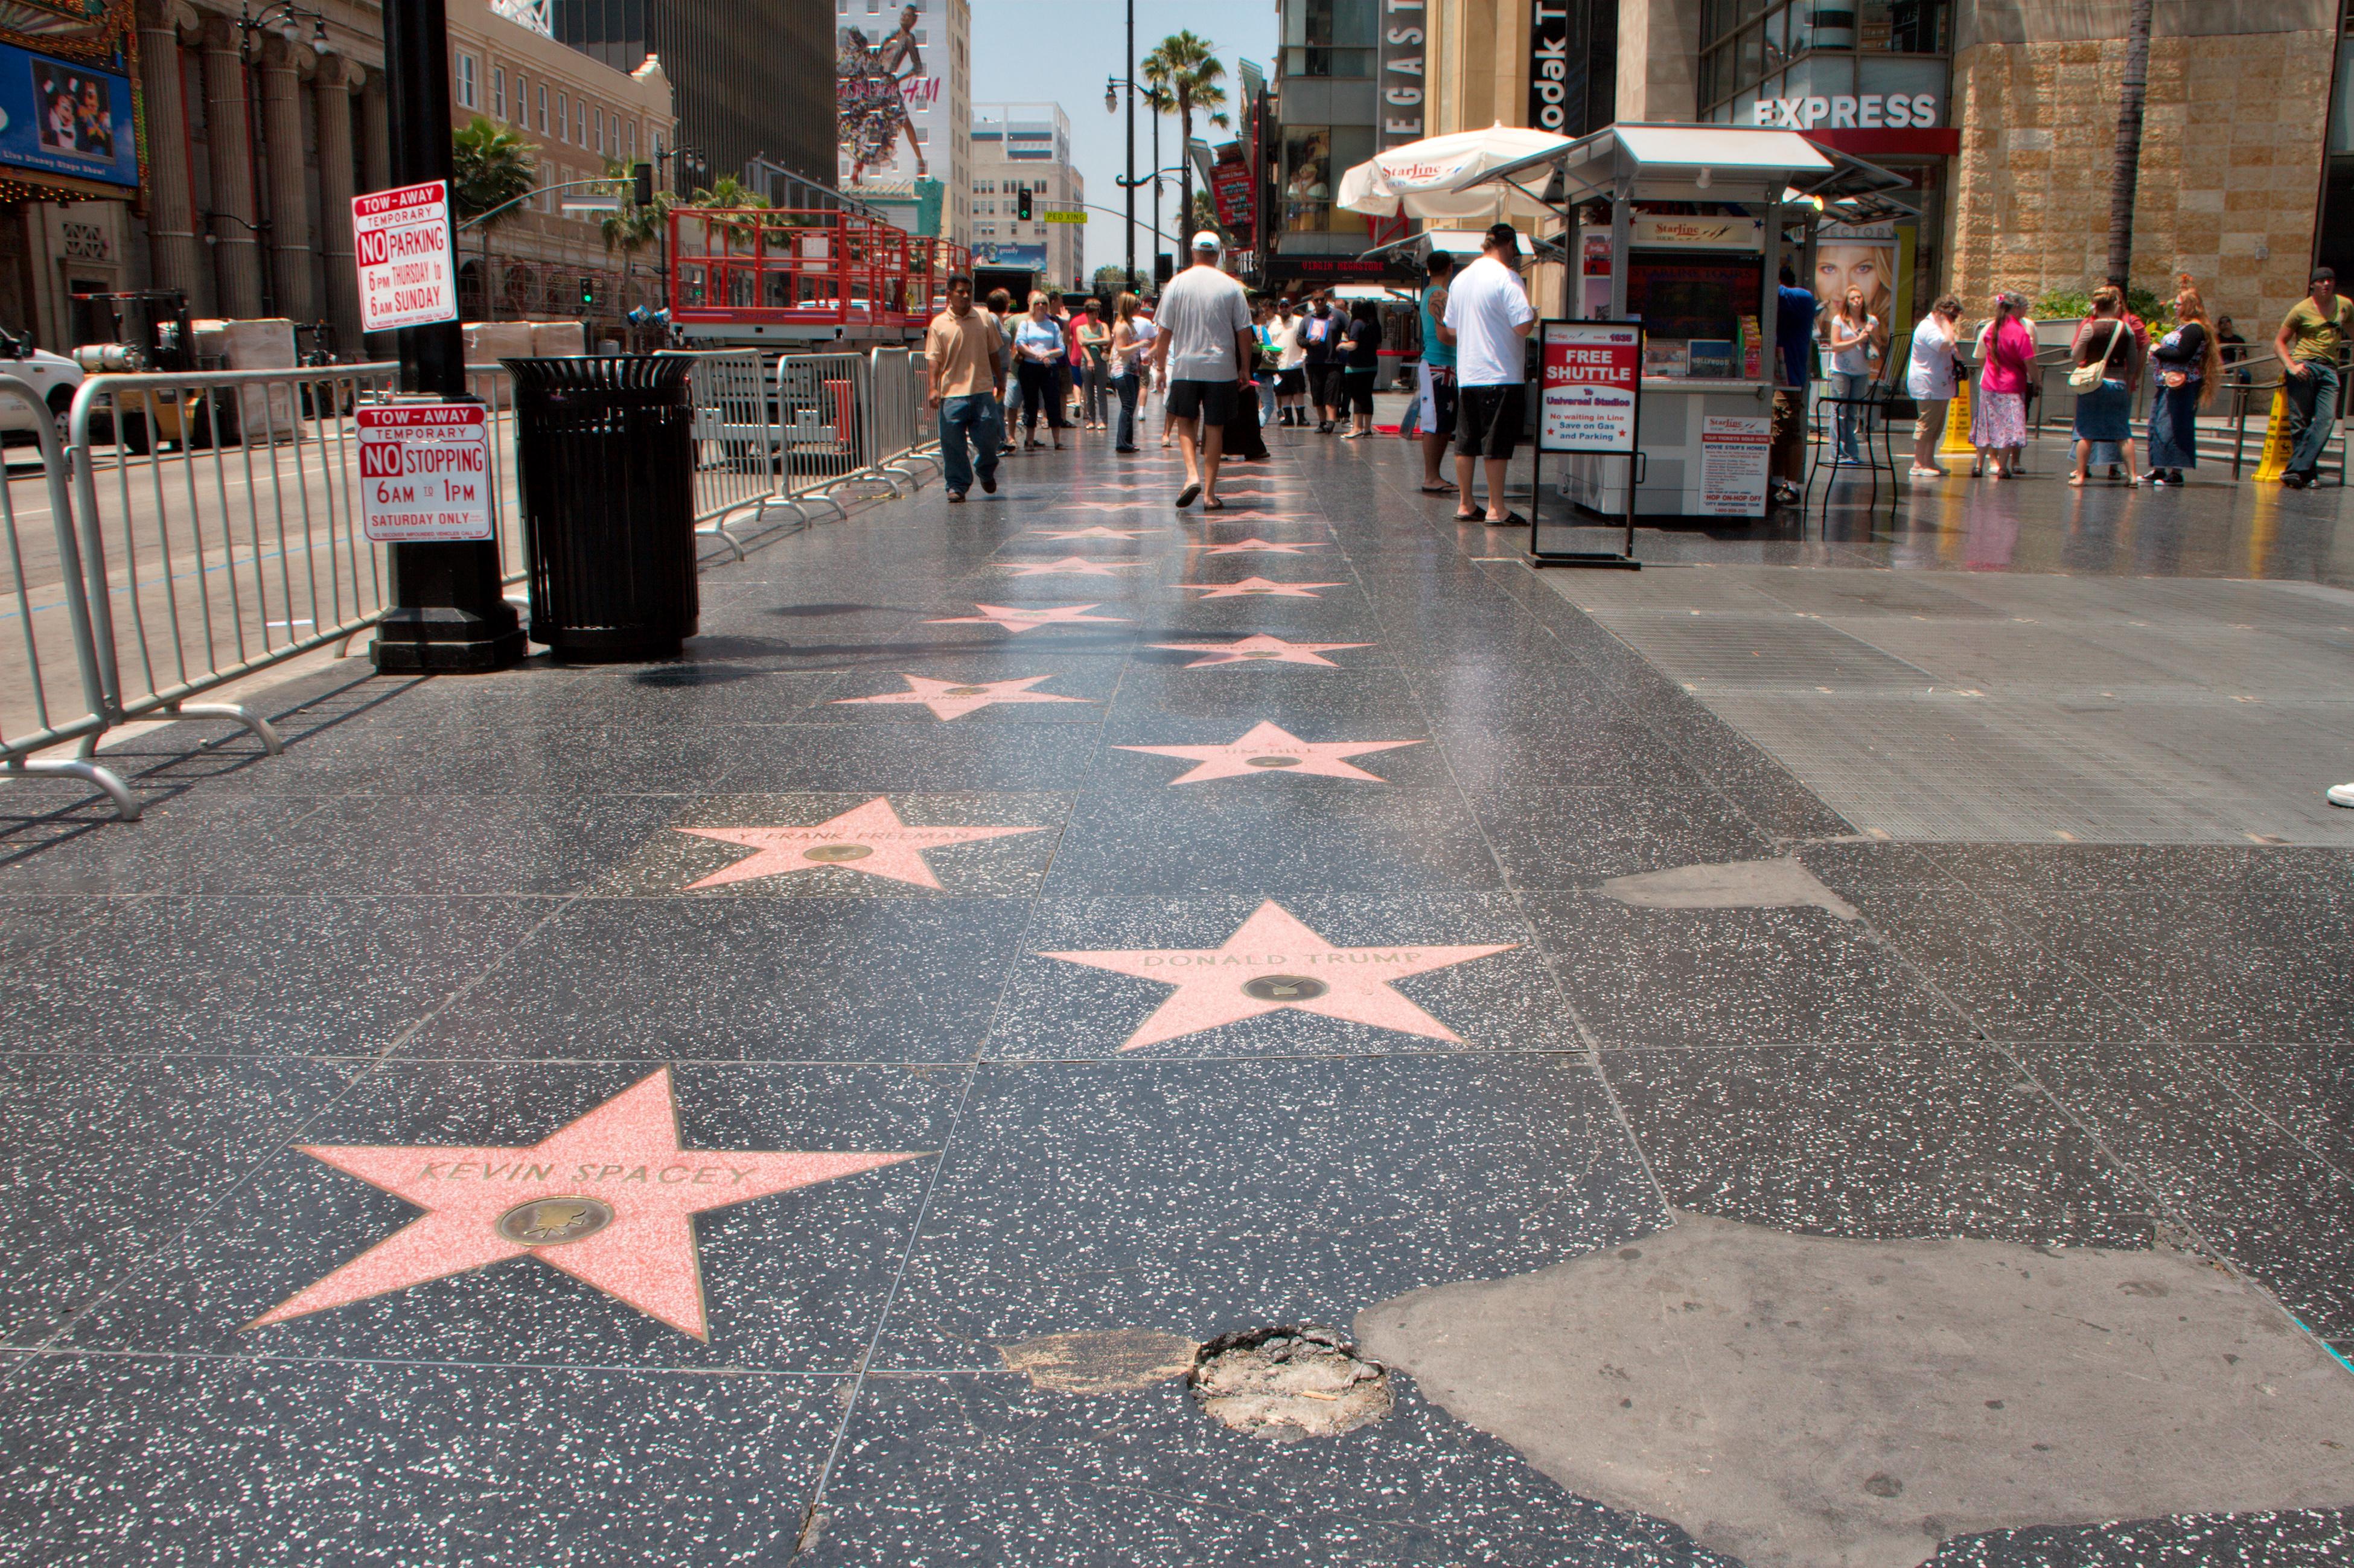 Hollywood Walk Of Fame Wallpapers